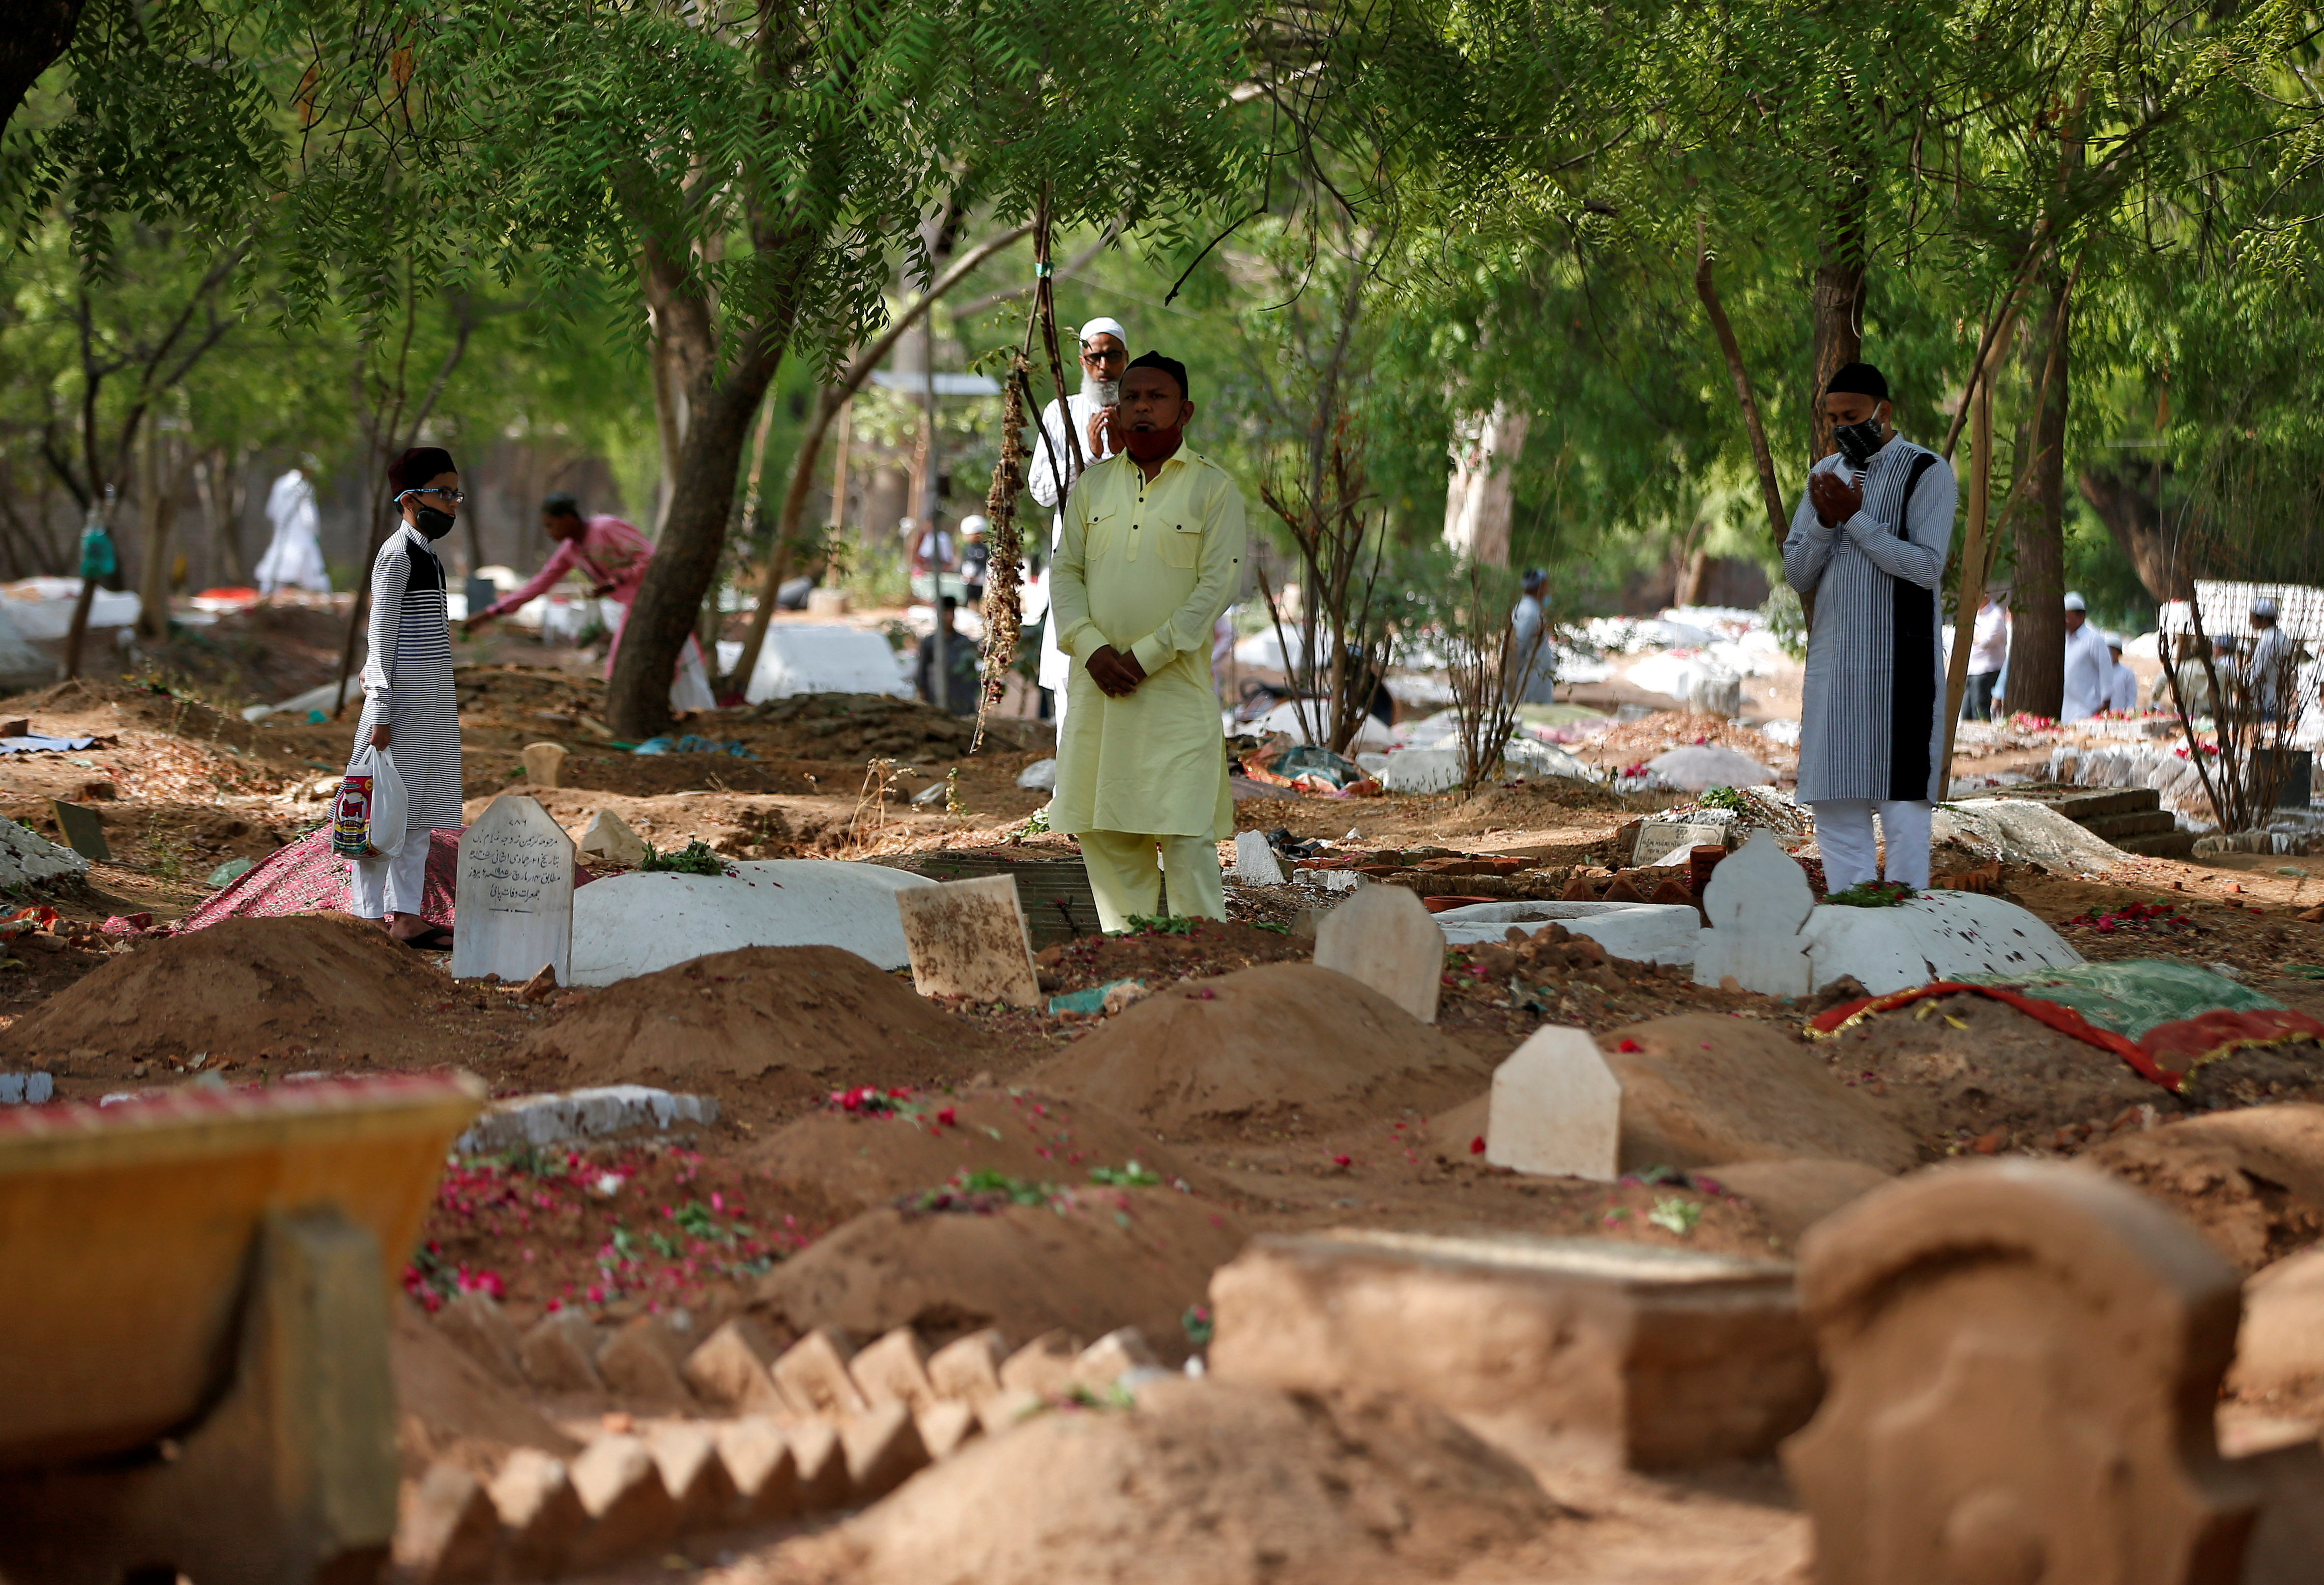 Muslims pray next to the graves of their relatives including those who died from the coronavirus disease (COVID-19), on the occasion of the Eid al-Fitr amidst the spread of the disease in Ahmedabad